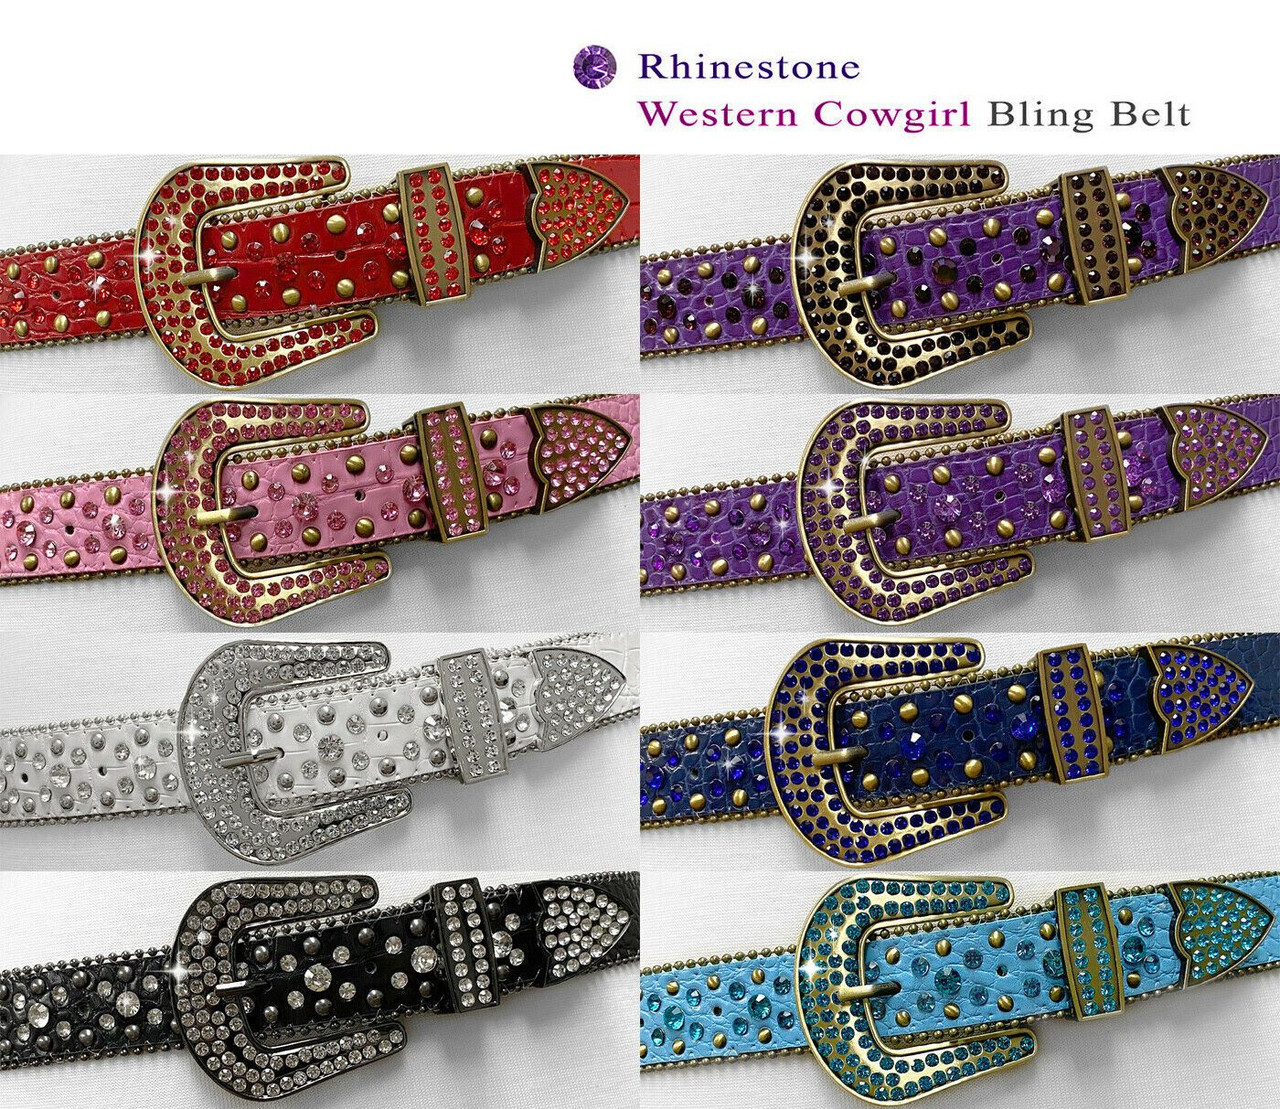 Silver Metal Belt with Crystal Rhinestones to decor women clothing.